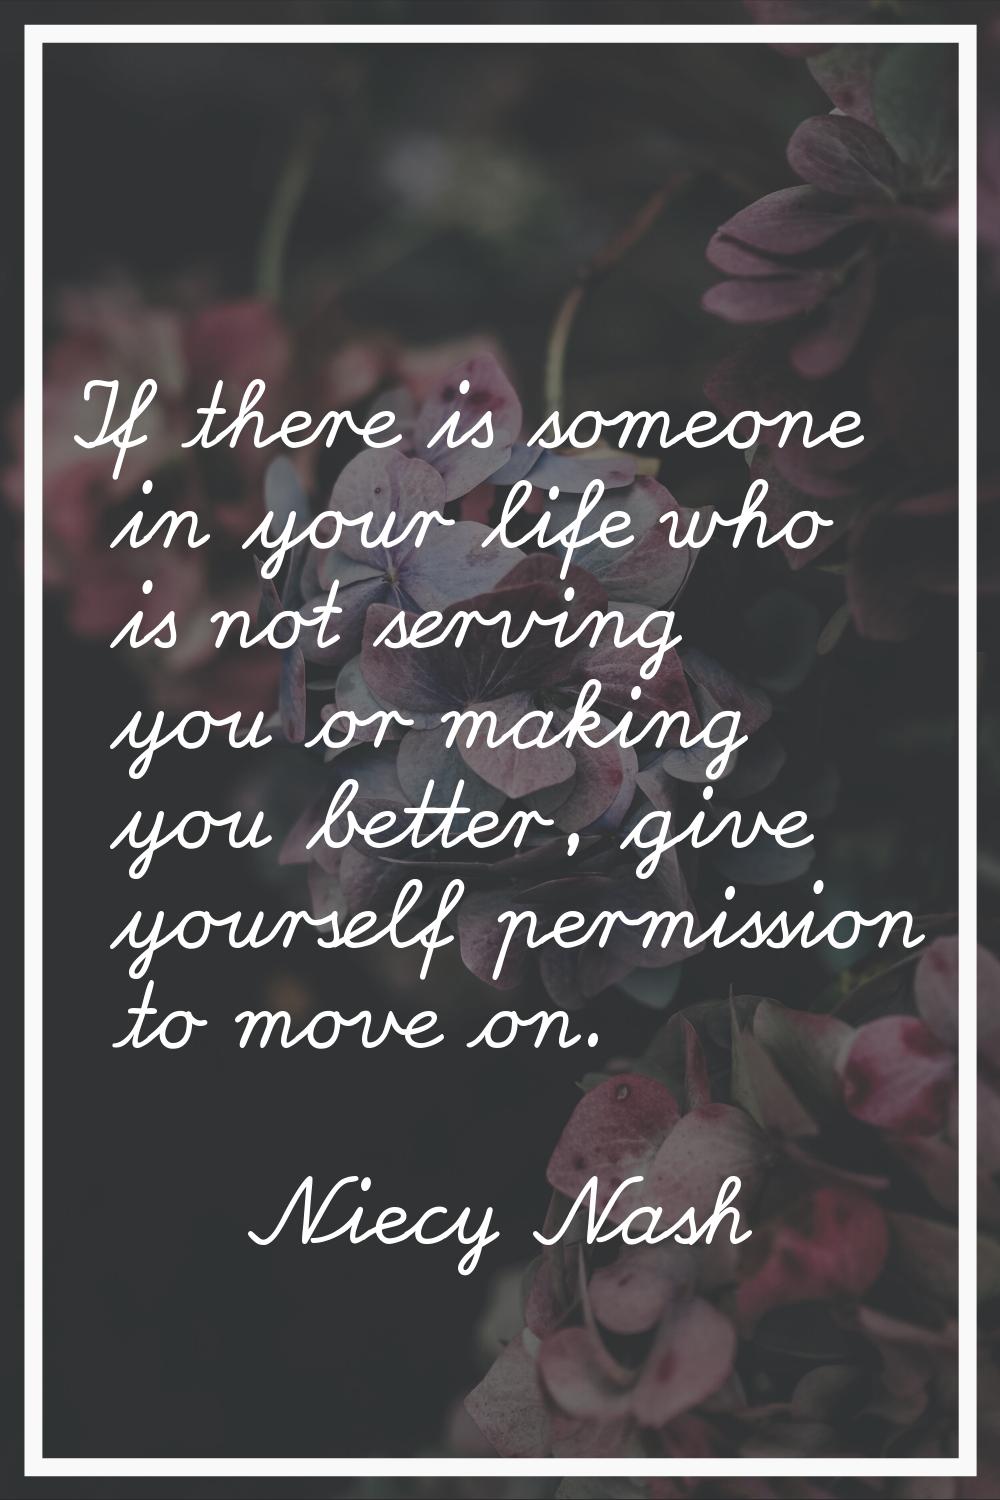 If there is someone in your life who is not serving you or making you better, give yourself permiss